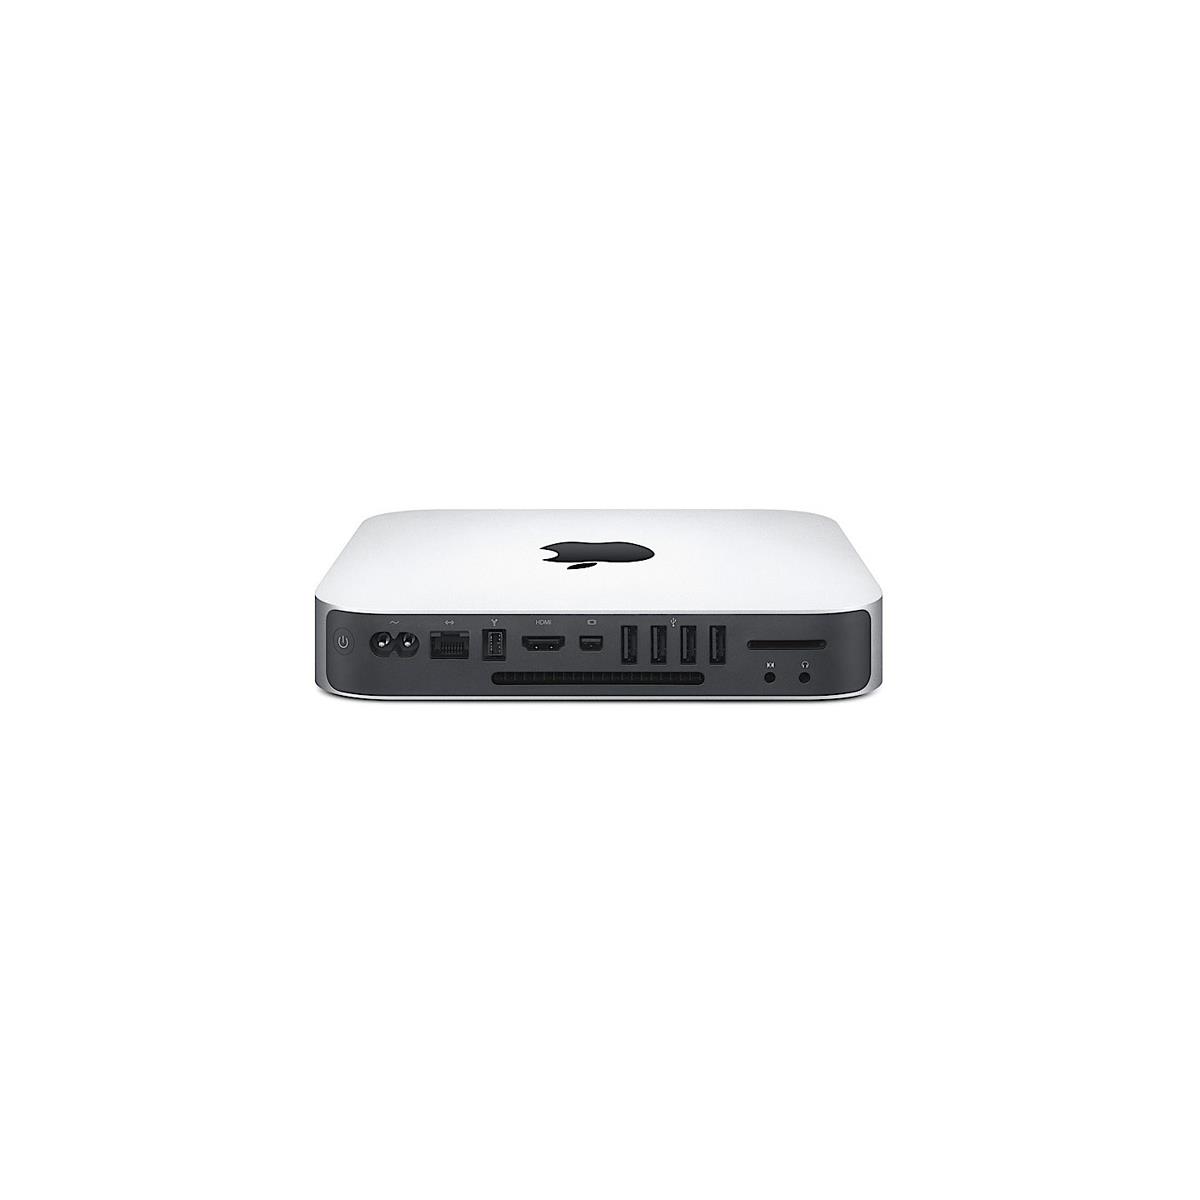 Apple releases redesigned Mac mini with HDMI port starting at $699